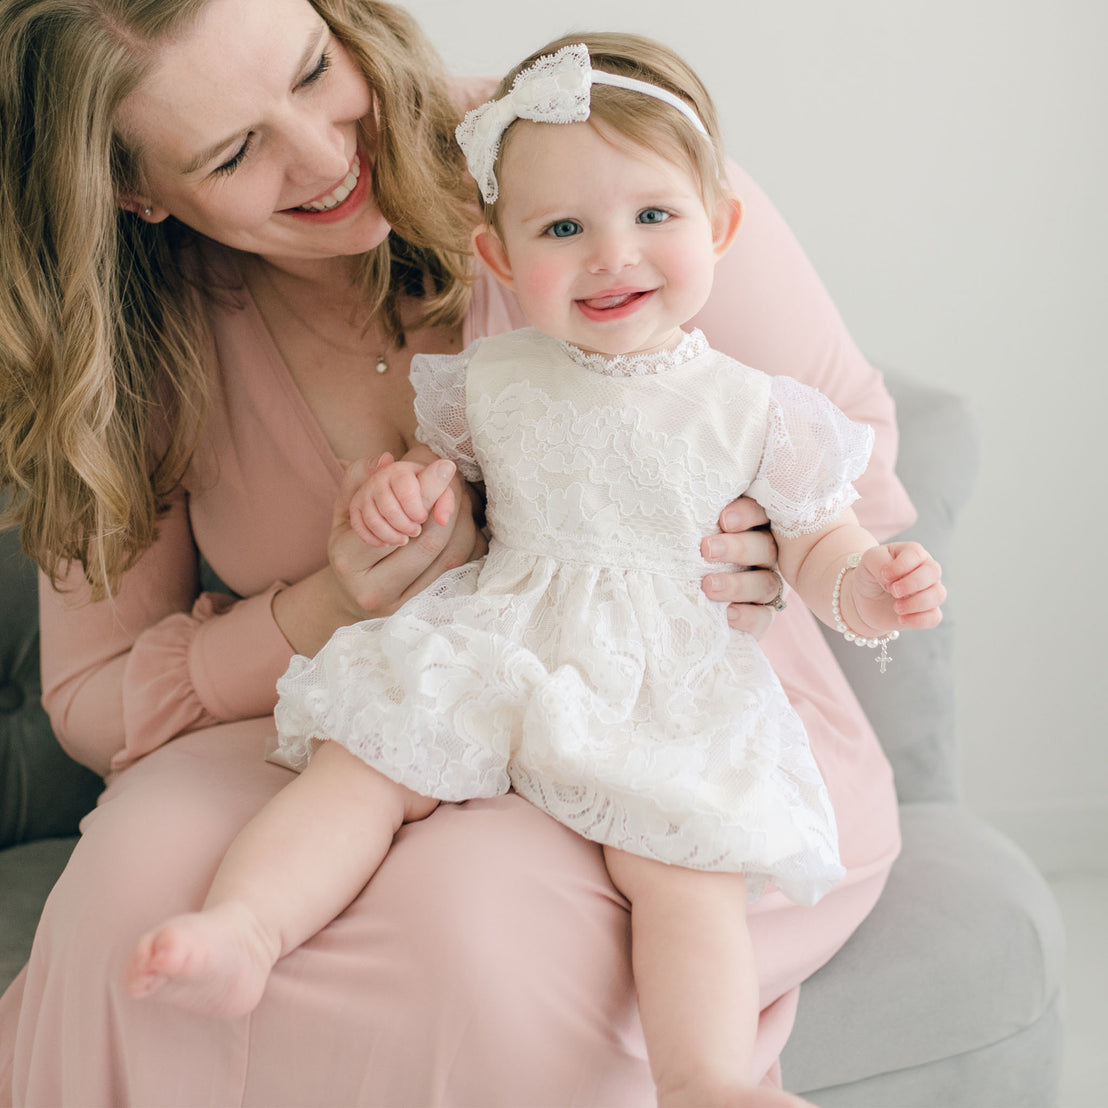 A joyful woman in a pink dress holding a smiling baby girl in an Aria Bubble Romper and Aria Lace Bow Headband, sitting together on a gray armchair in a softly lit room.